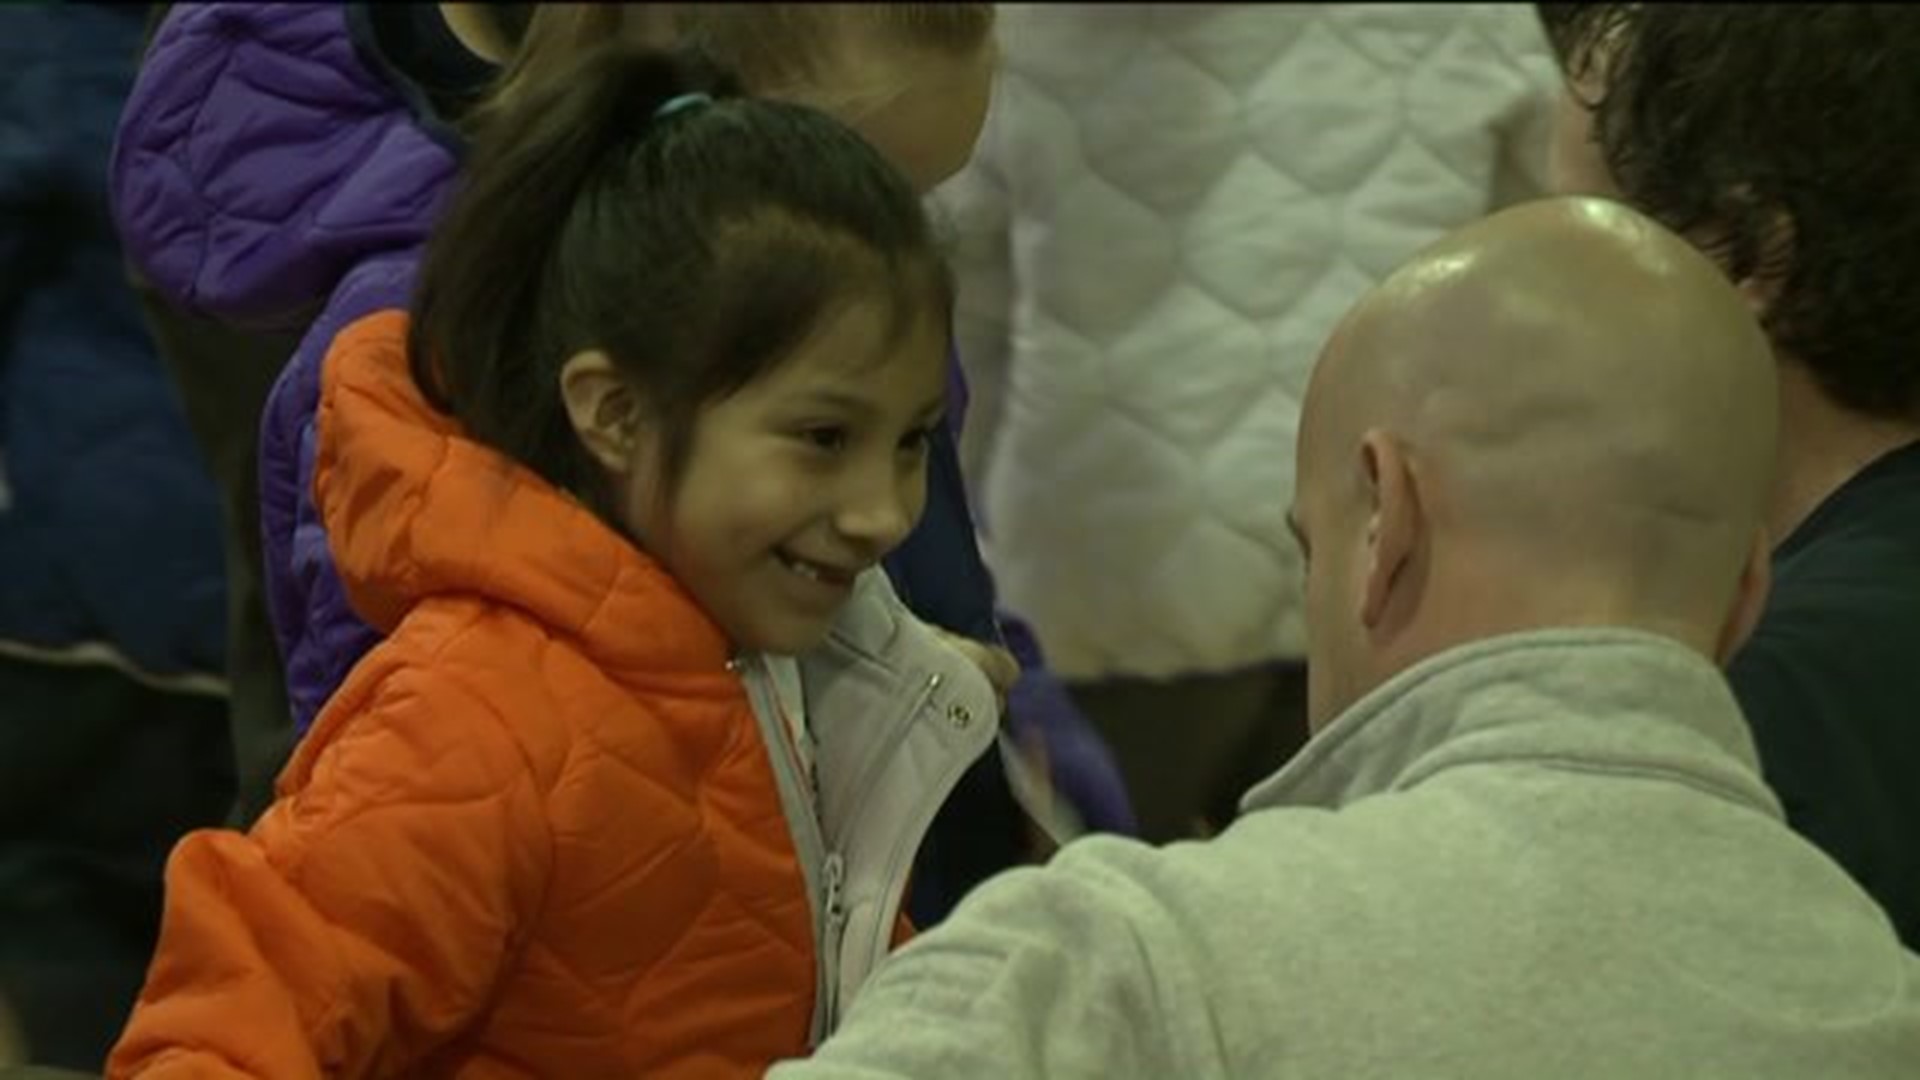 Firefighters Give Gifts of Warmth to Elementary Students